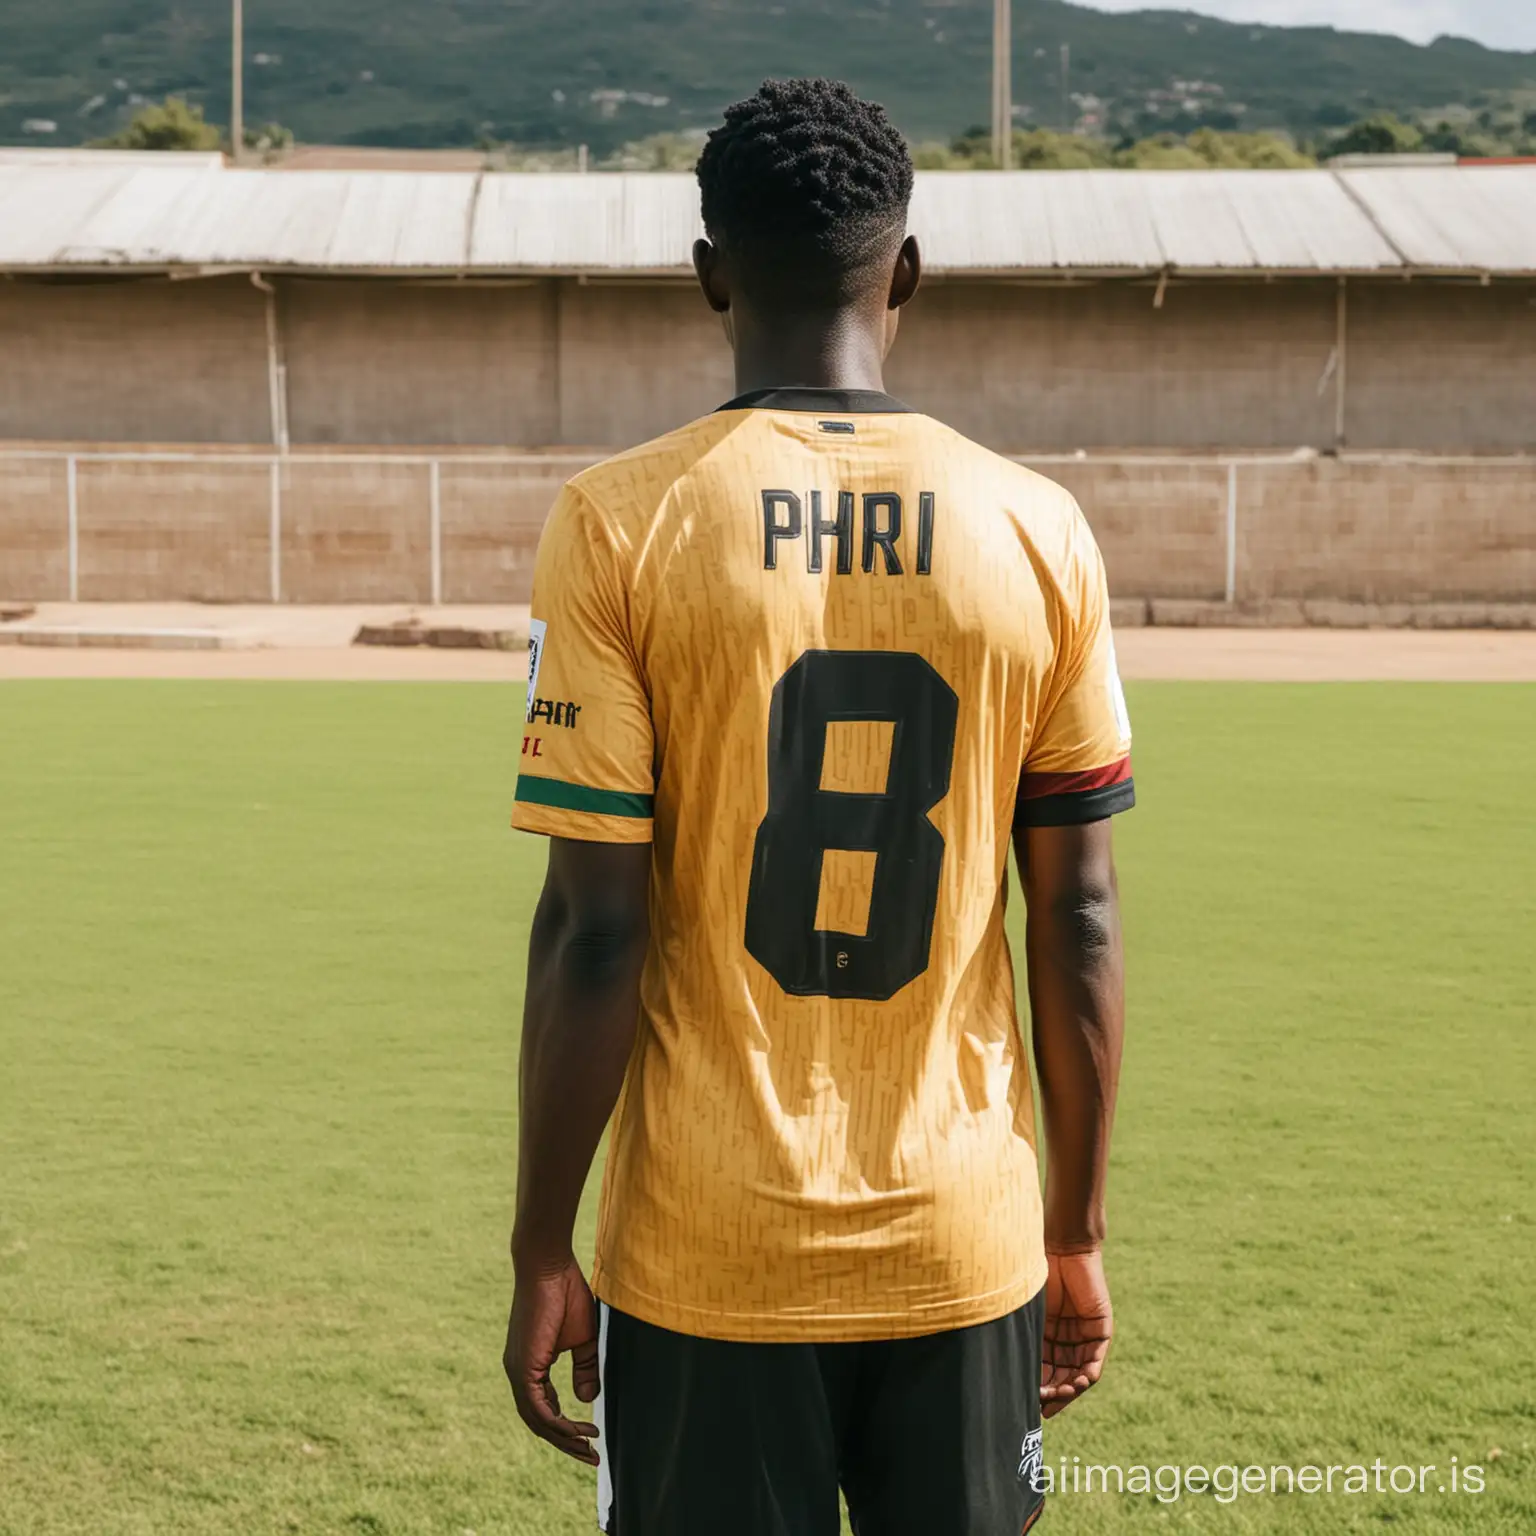 Man with Soccer jersey written PHIRI number 8 on the back